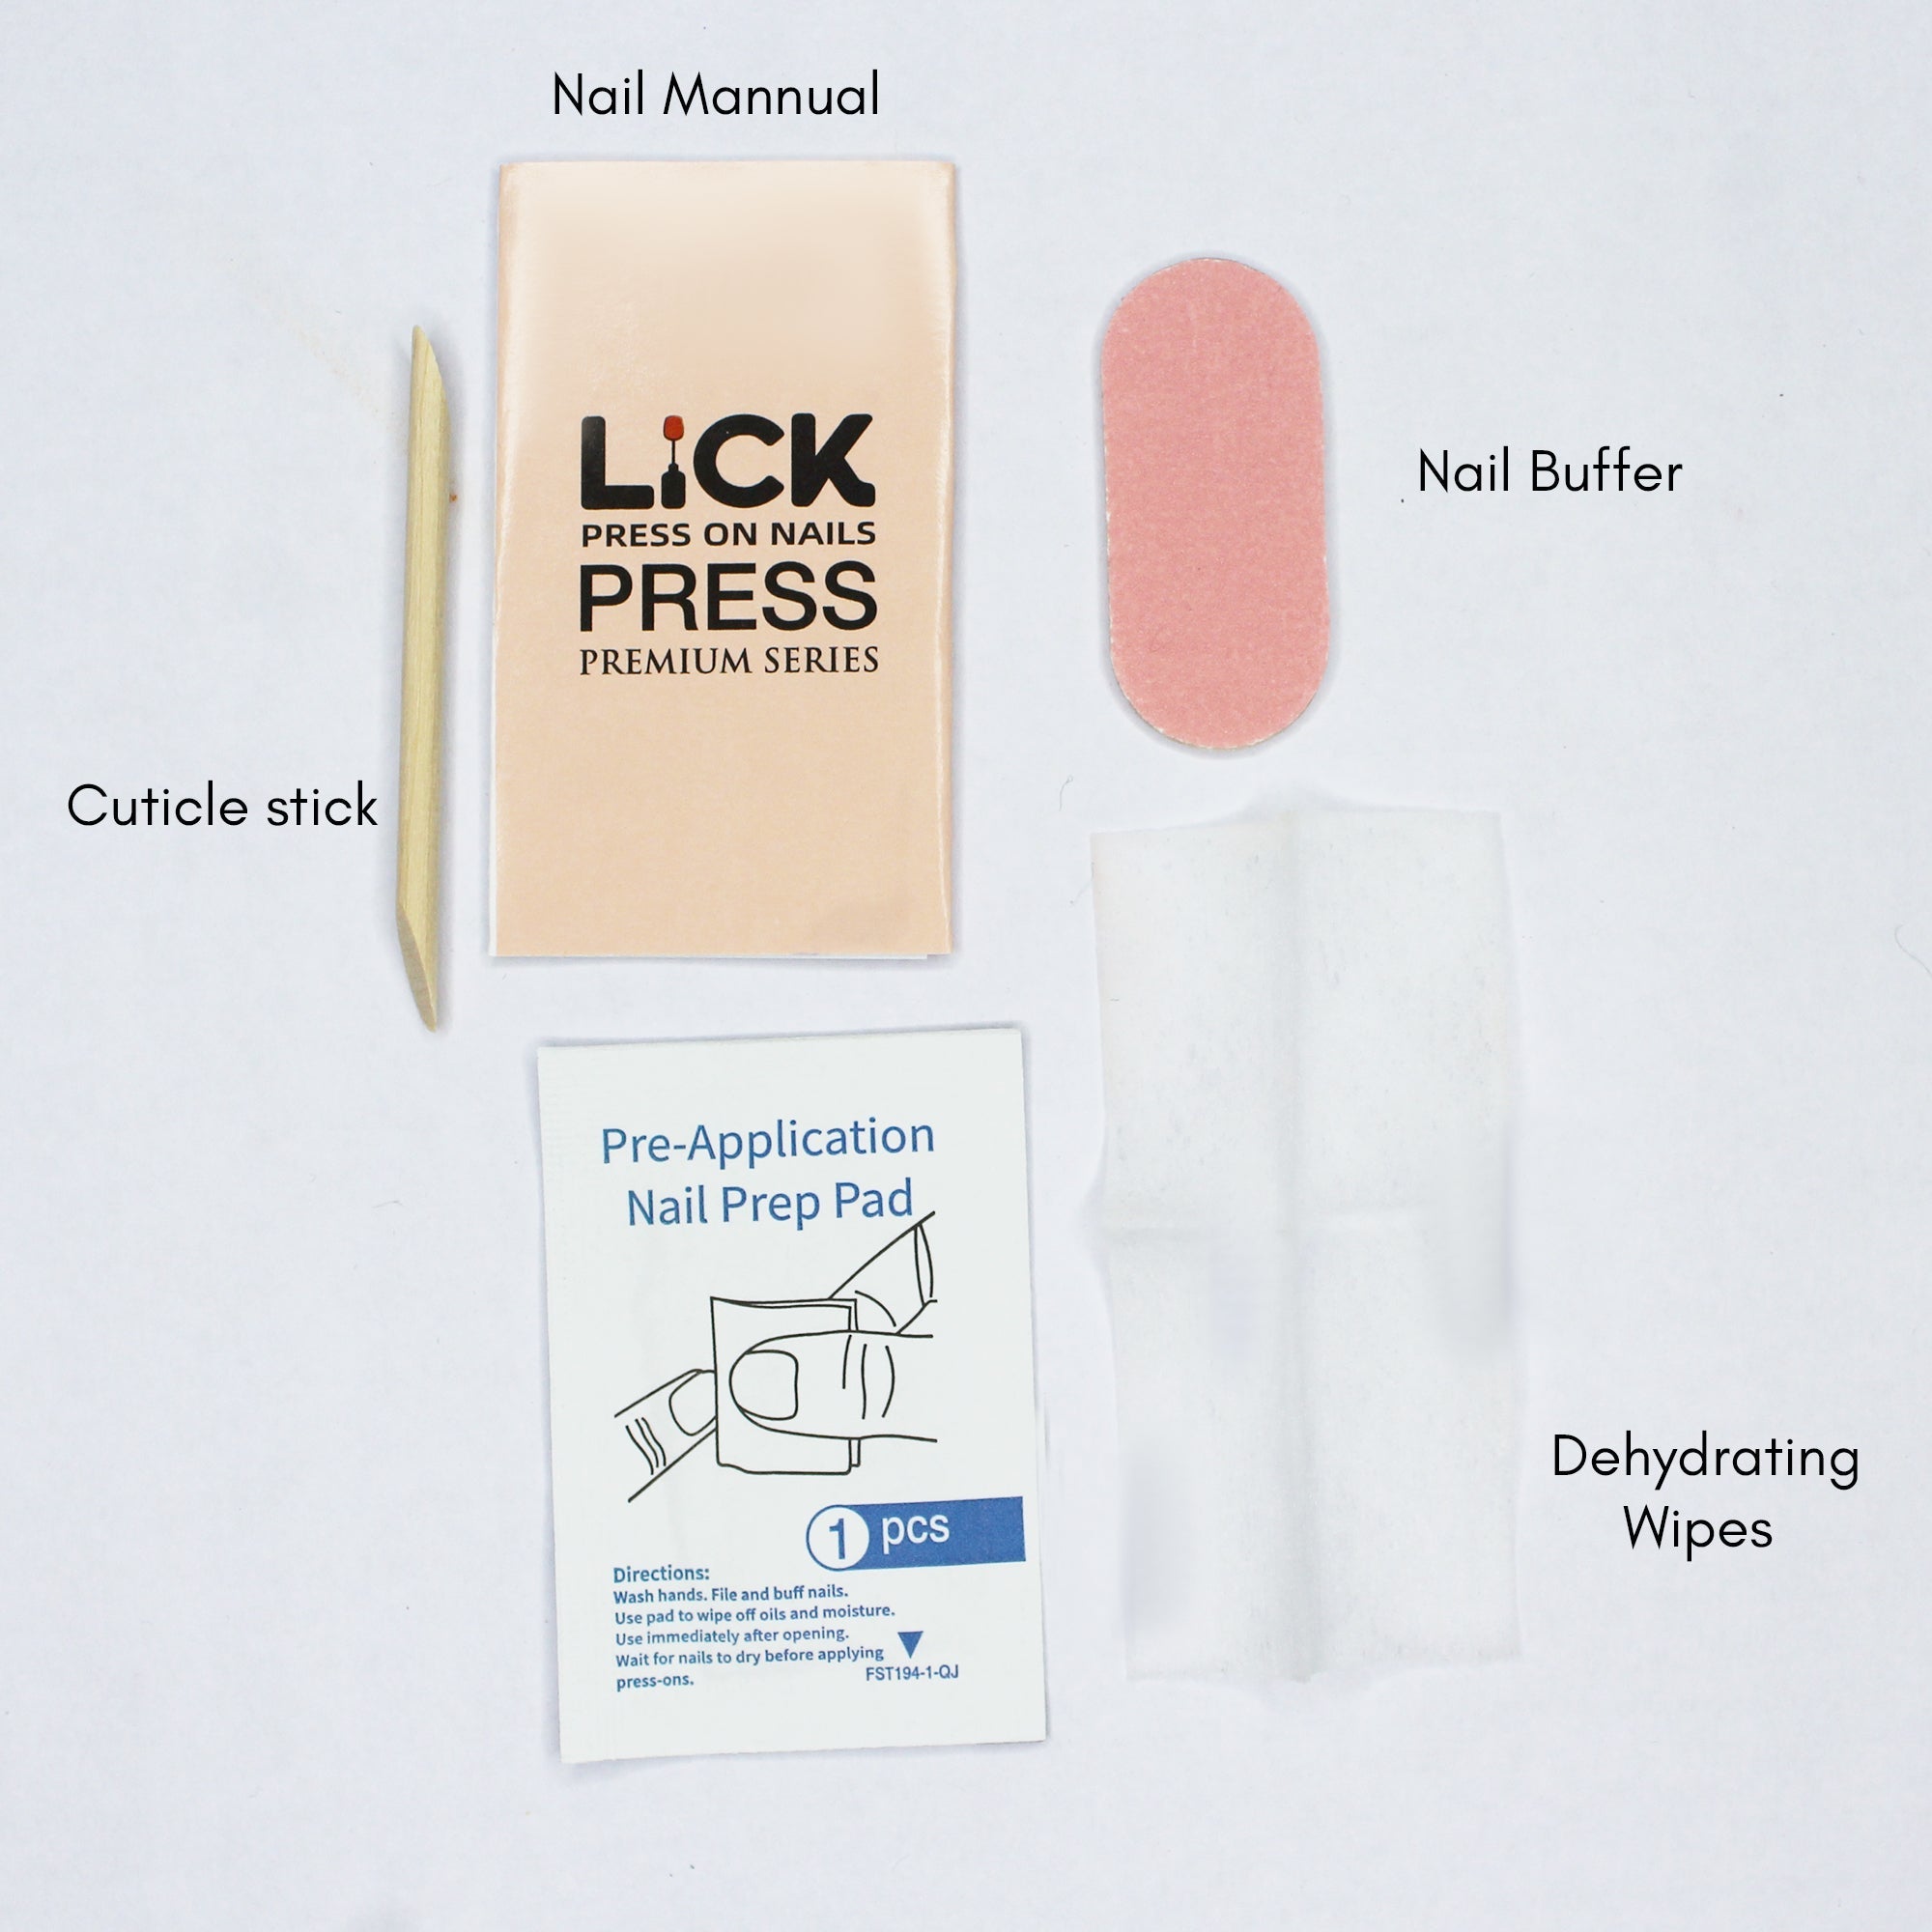 Lick Nail Glossy Finish Chromatic With 14 Peach Pink Stilettos Shape Press On Nails Pack Of 28 Pcs